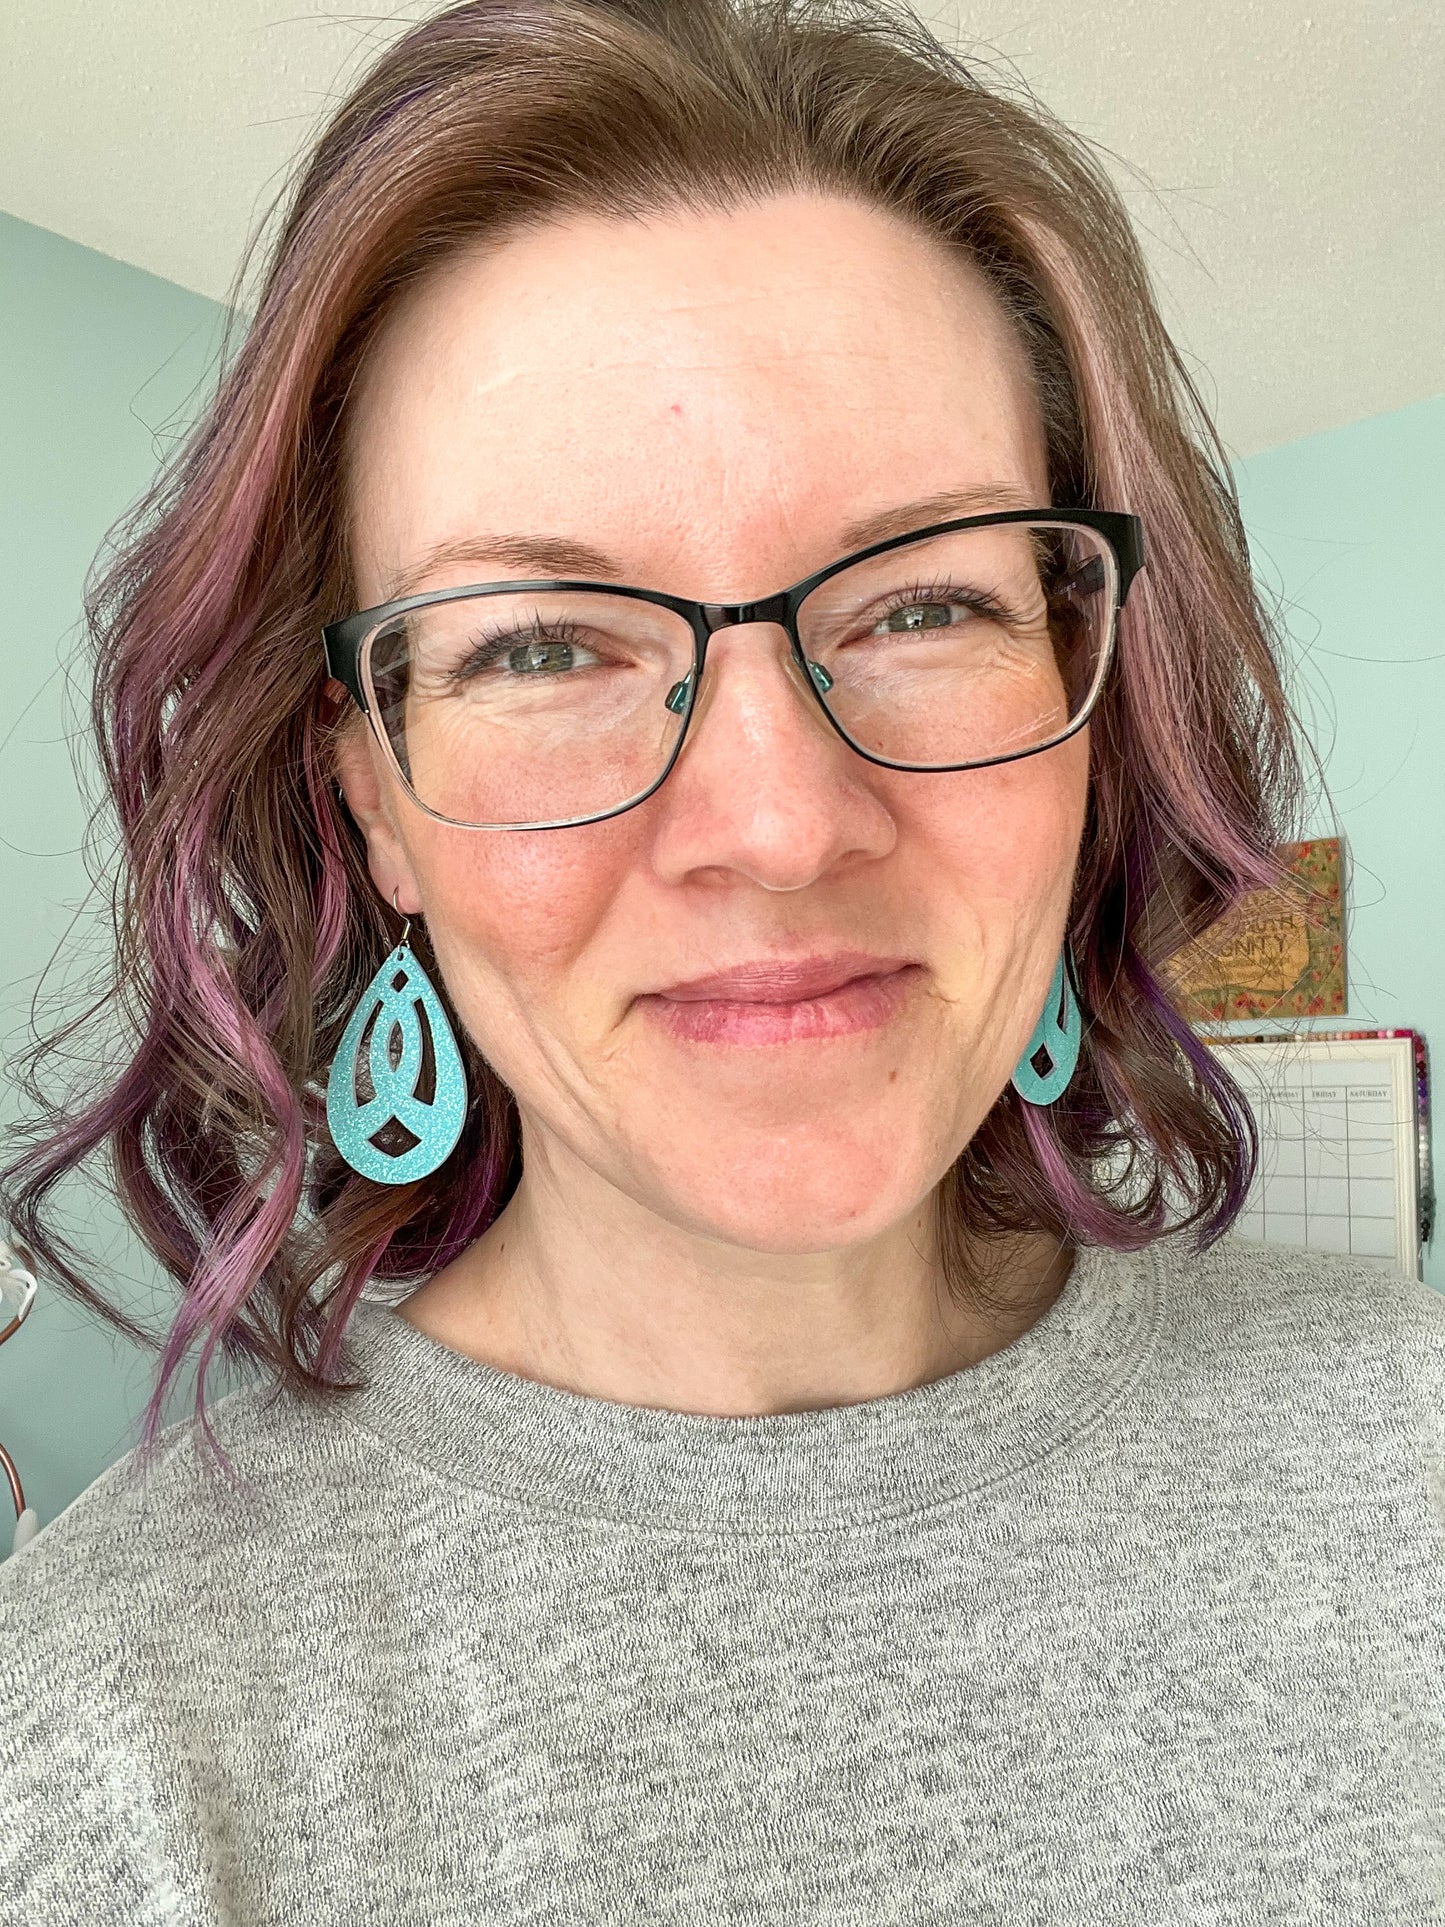 Teal/Turquoise Infused Glitter Awareness Ribbon Leather Earrings: Ovarian Cancer, Dysautonomia